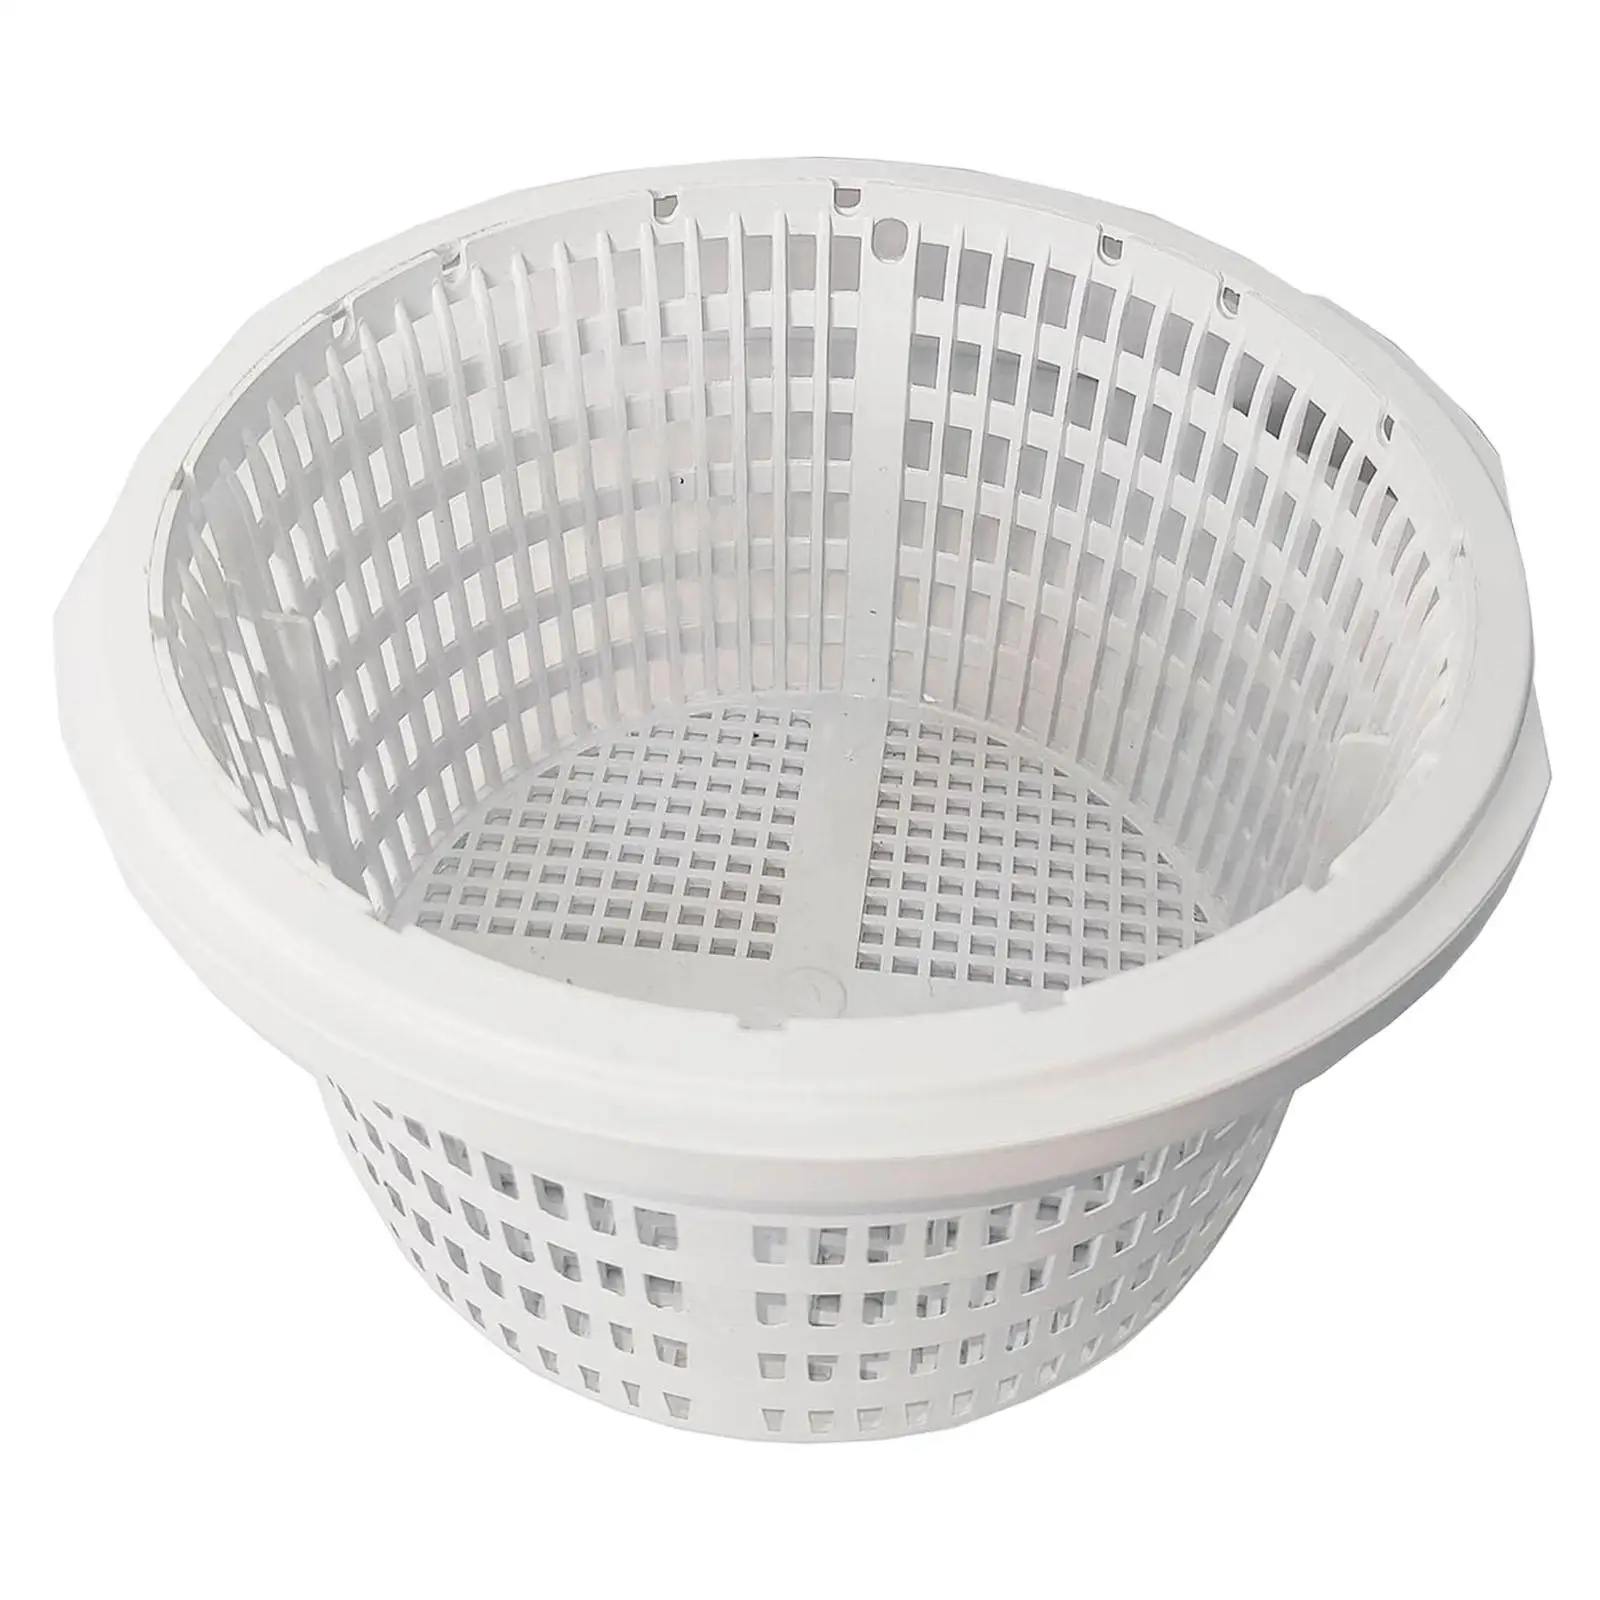 

1x Pool Filter Basket Replacement Plastic Accessories Reusable Cleaning Tool Durable Skimmer Basket Strainer for Cleaning Grass